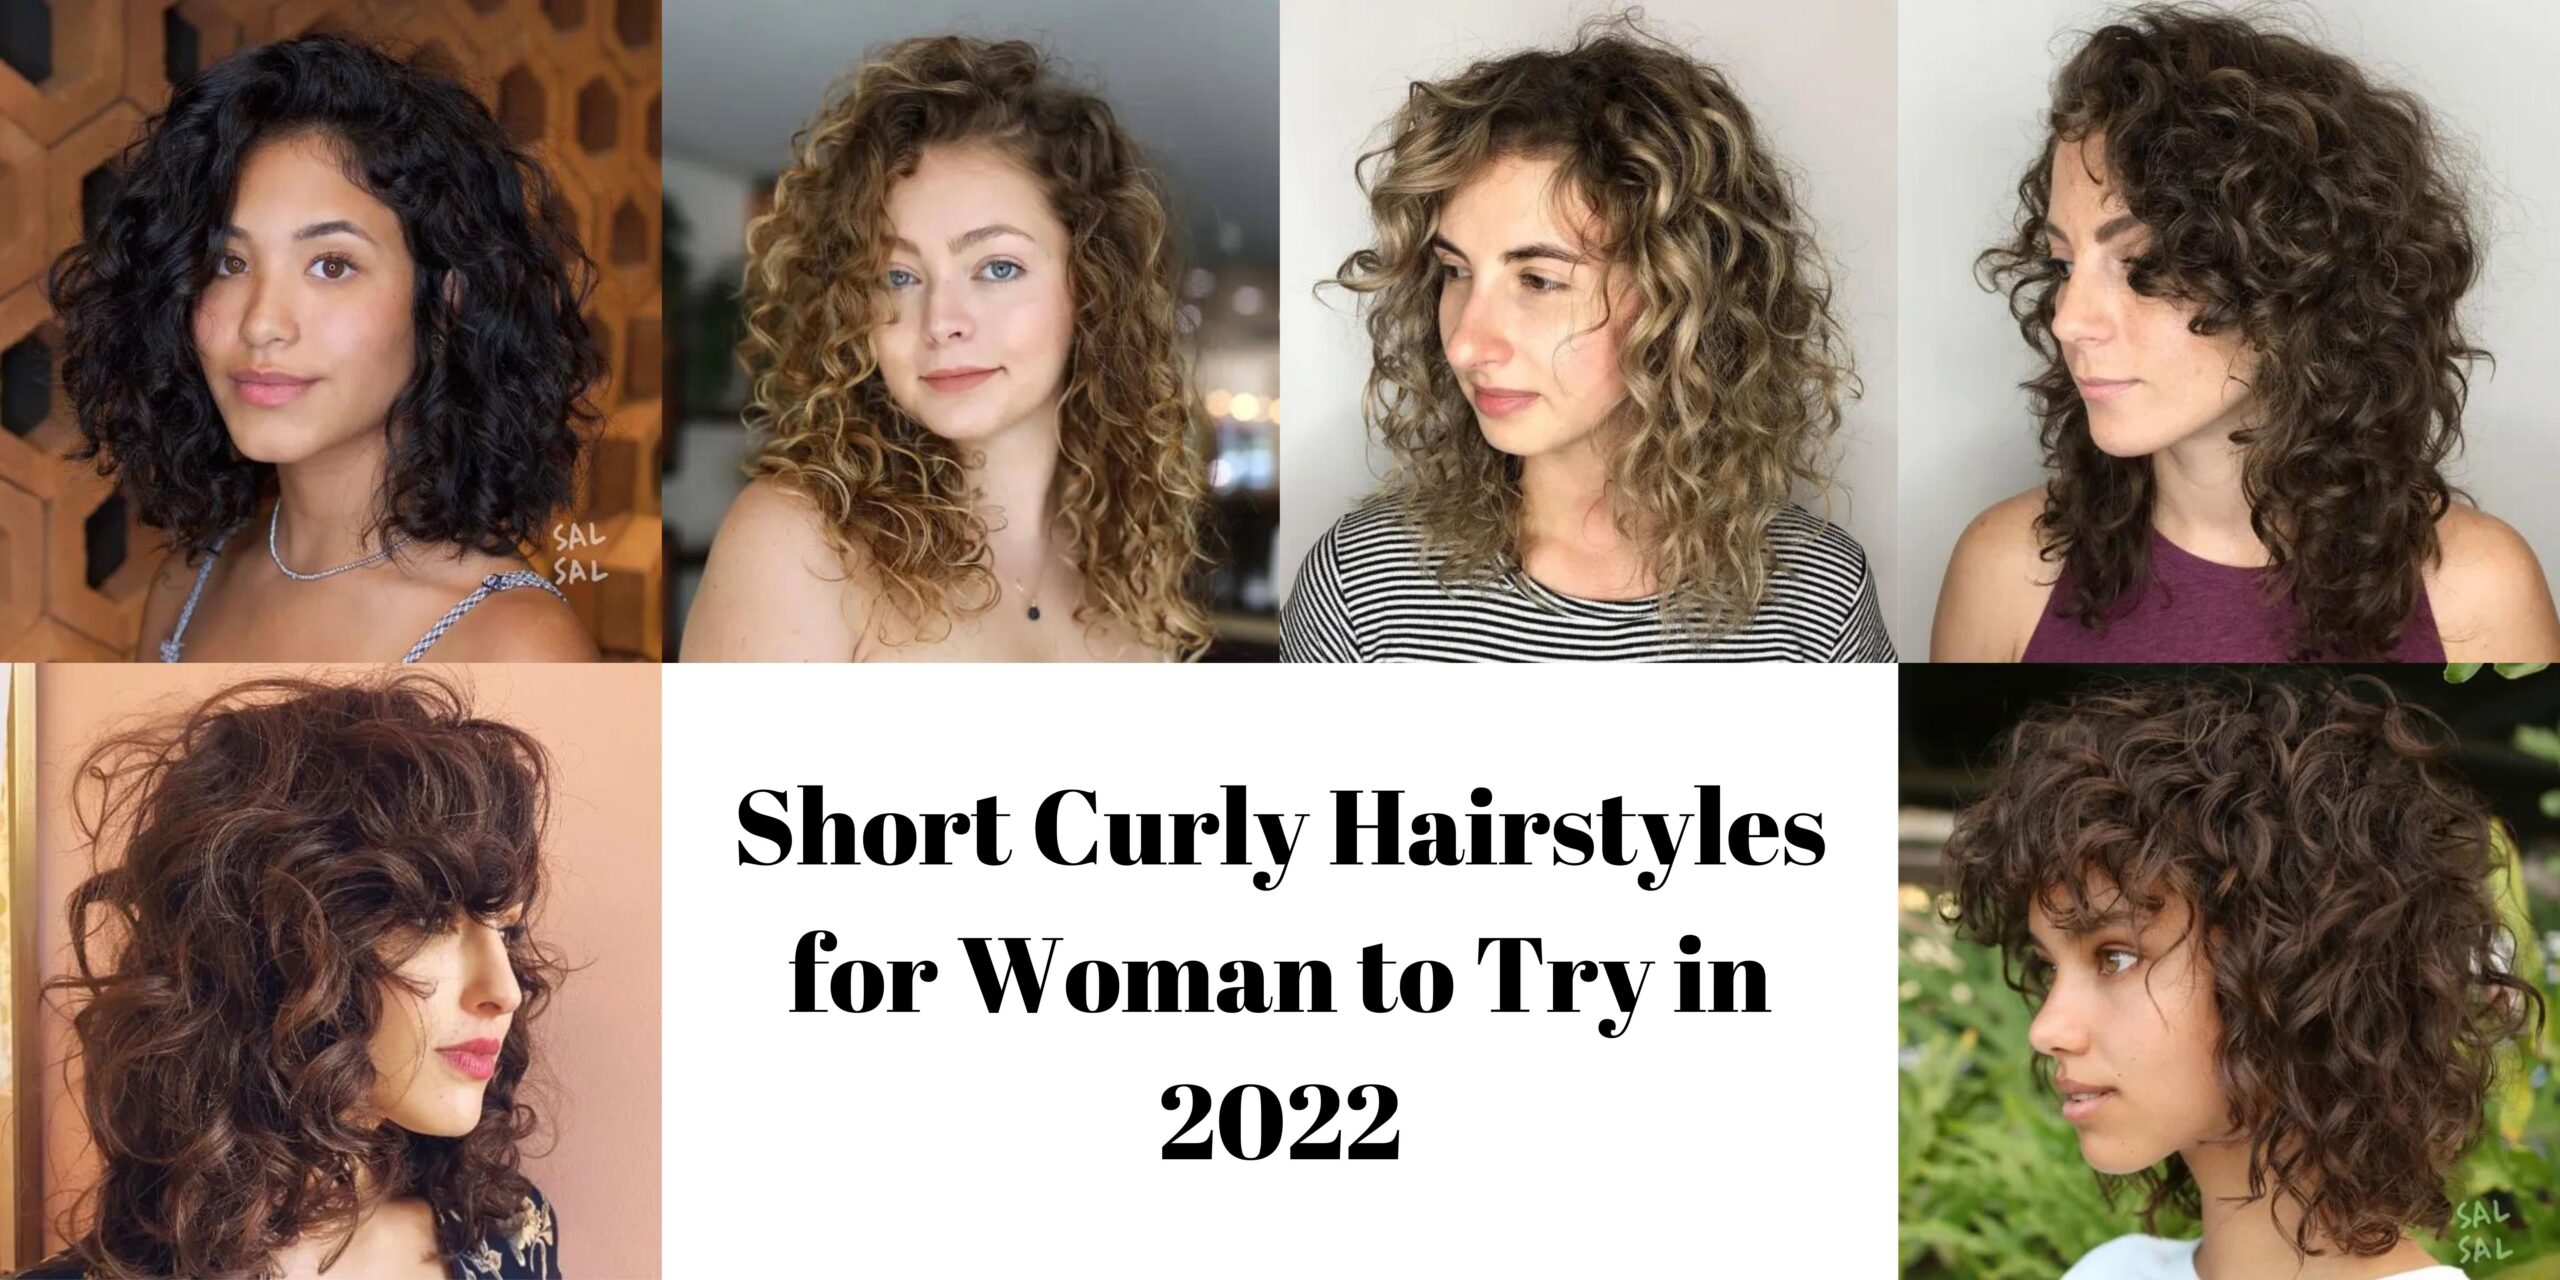 Short Curly hairstyles for woman to try in 2022